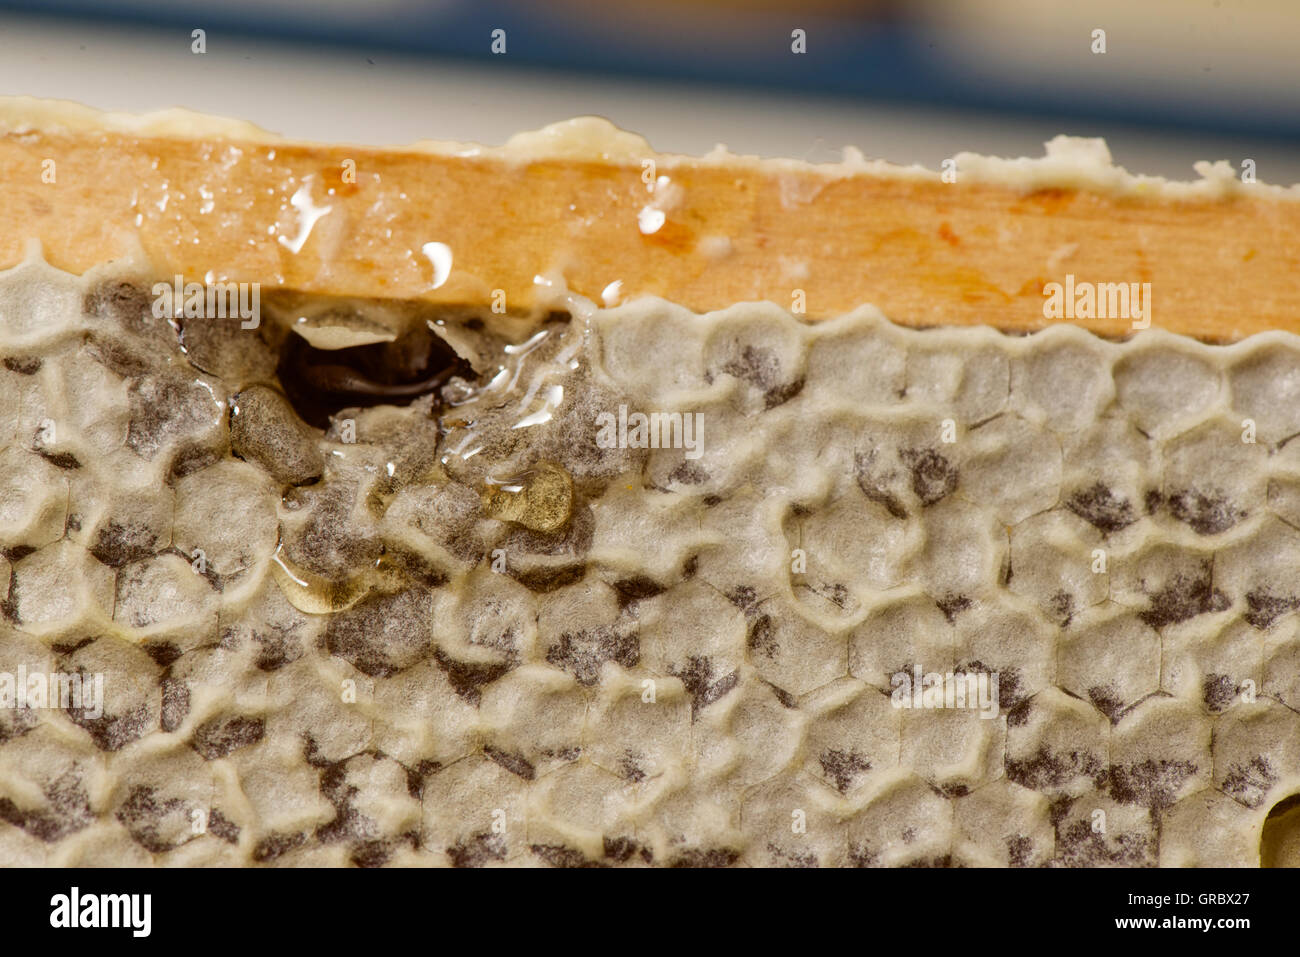 Capped Honeycomb Cells, Dripping Honey Stock Photo